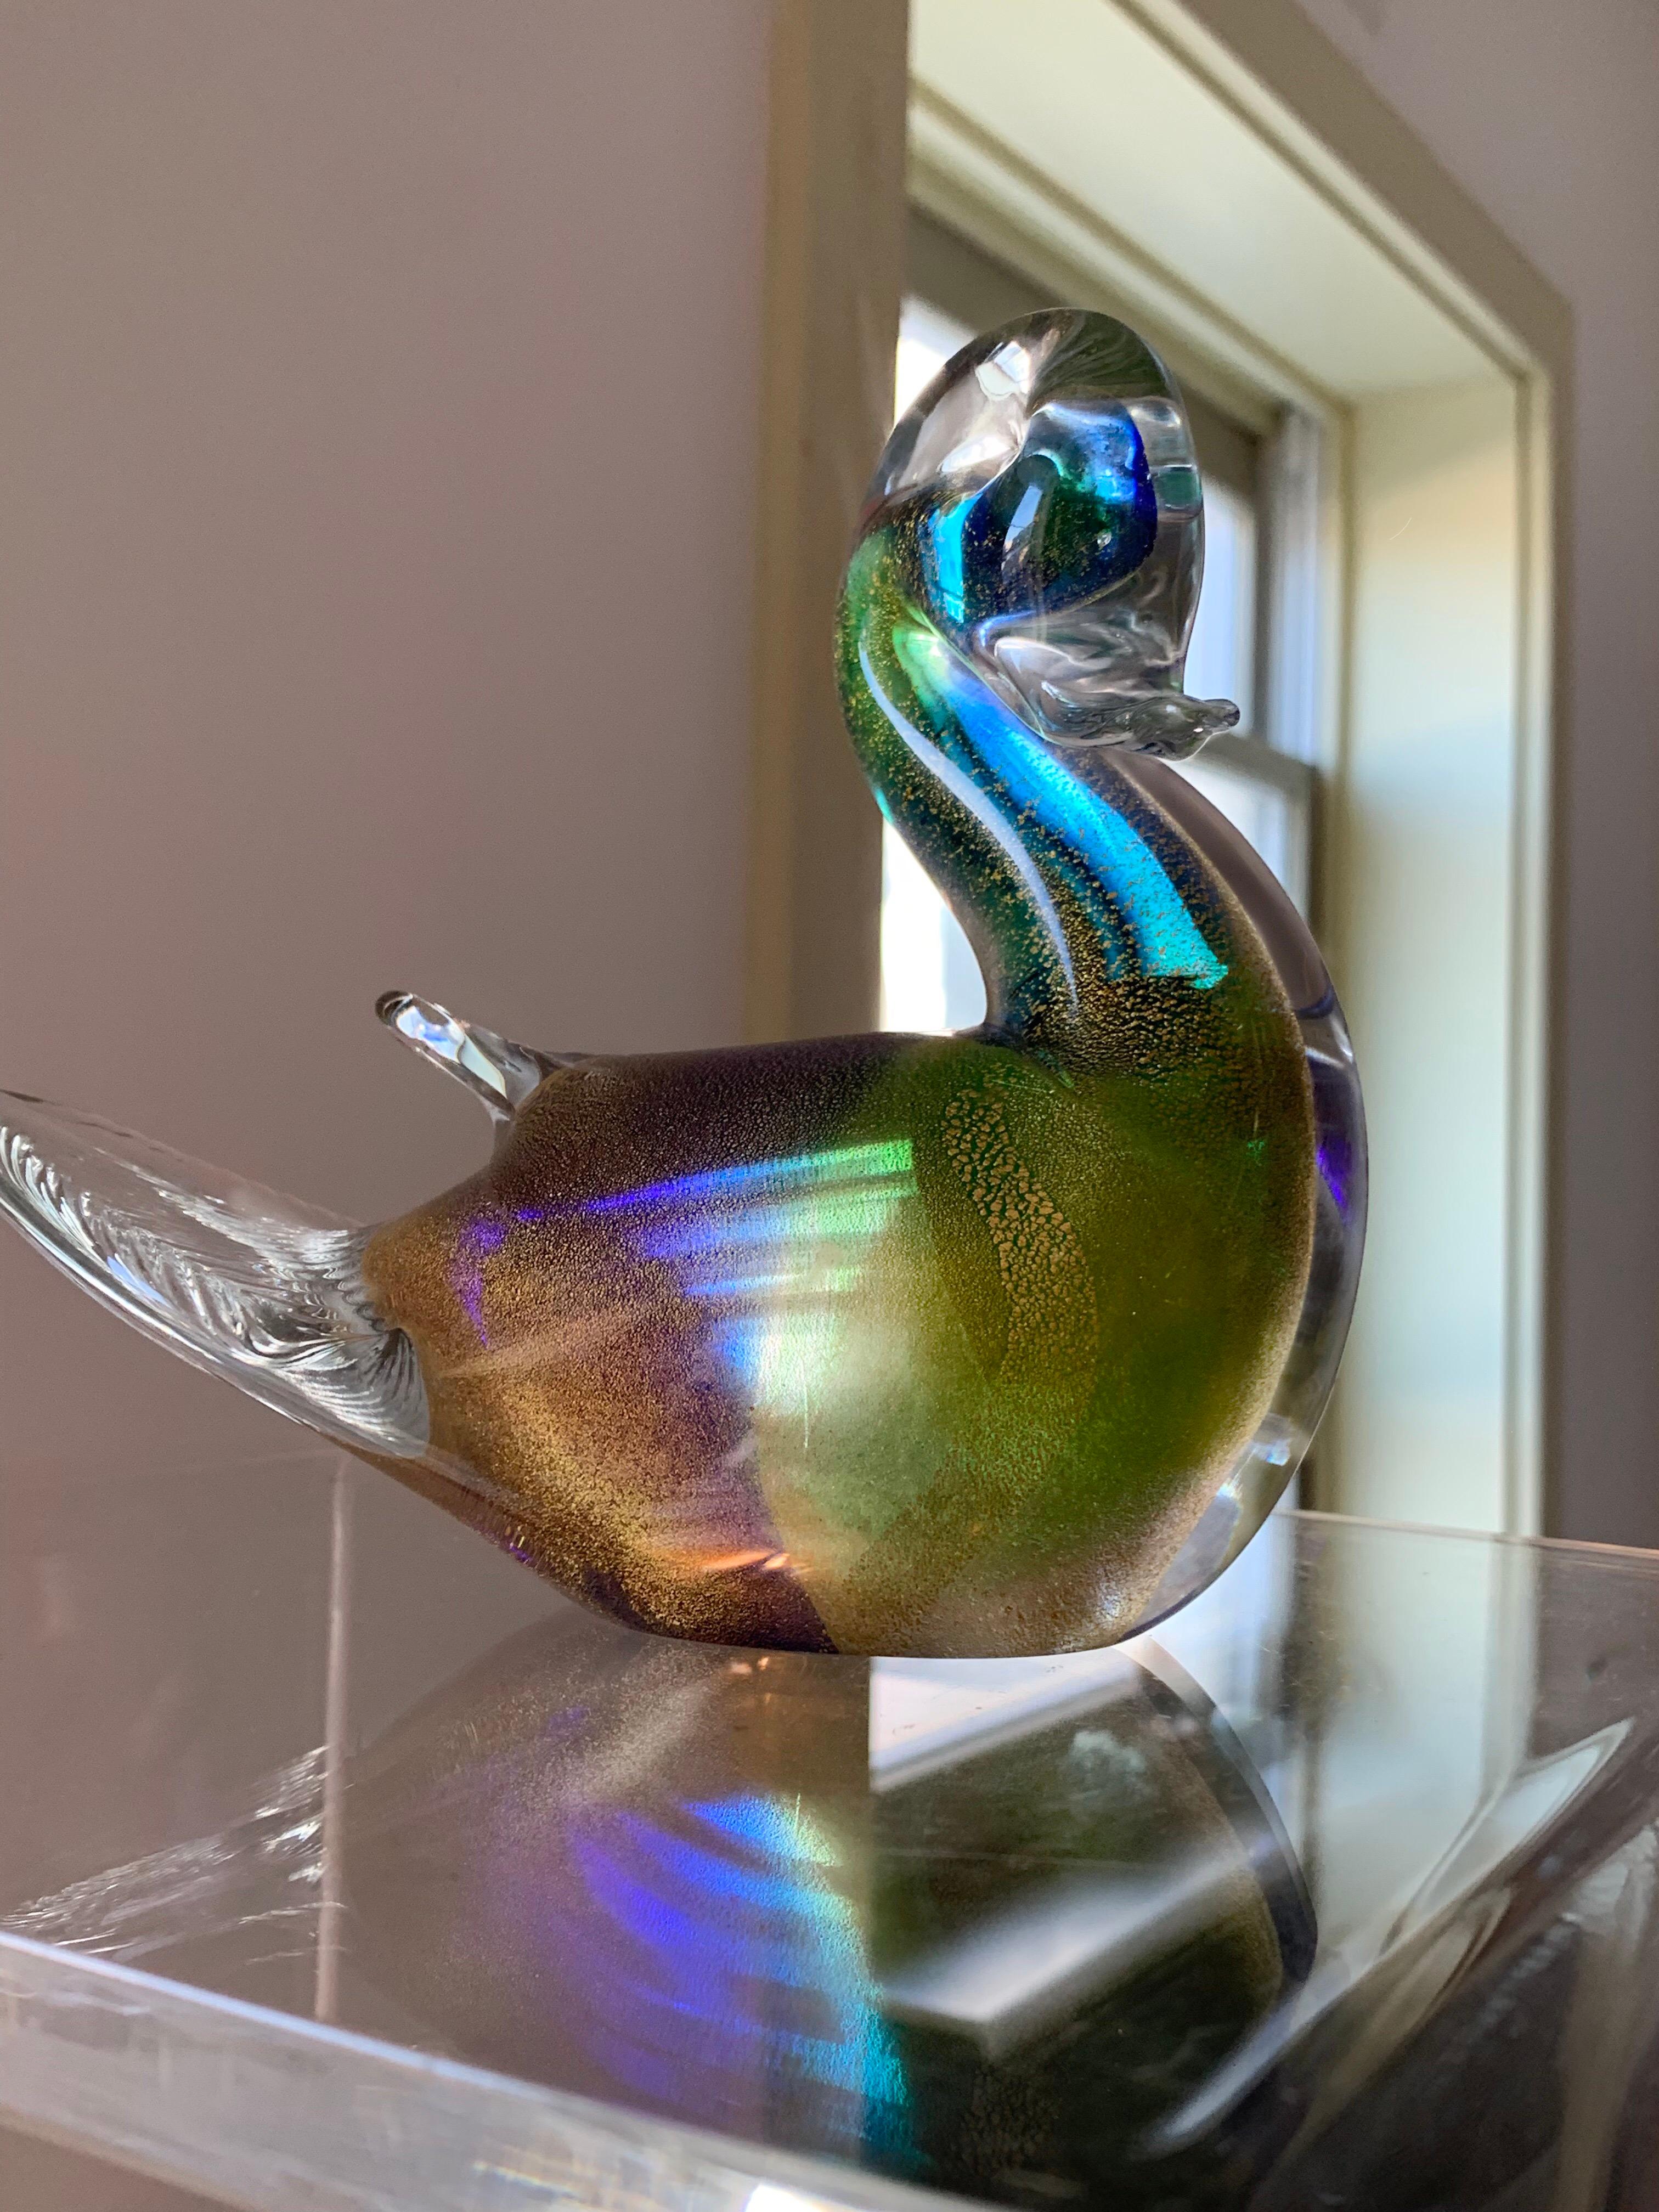 Midcentury Murano Art glass turtledove lovebird 24-karat gold fleck blue green, 1960s. With importers tag. Gorgeous texture at center and ruich color. Poetic, sculptural form. 4 available. Listing is for one.